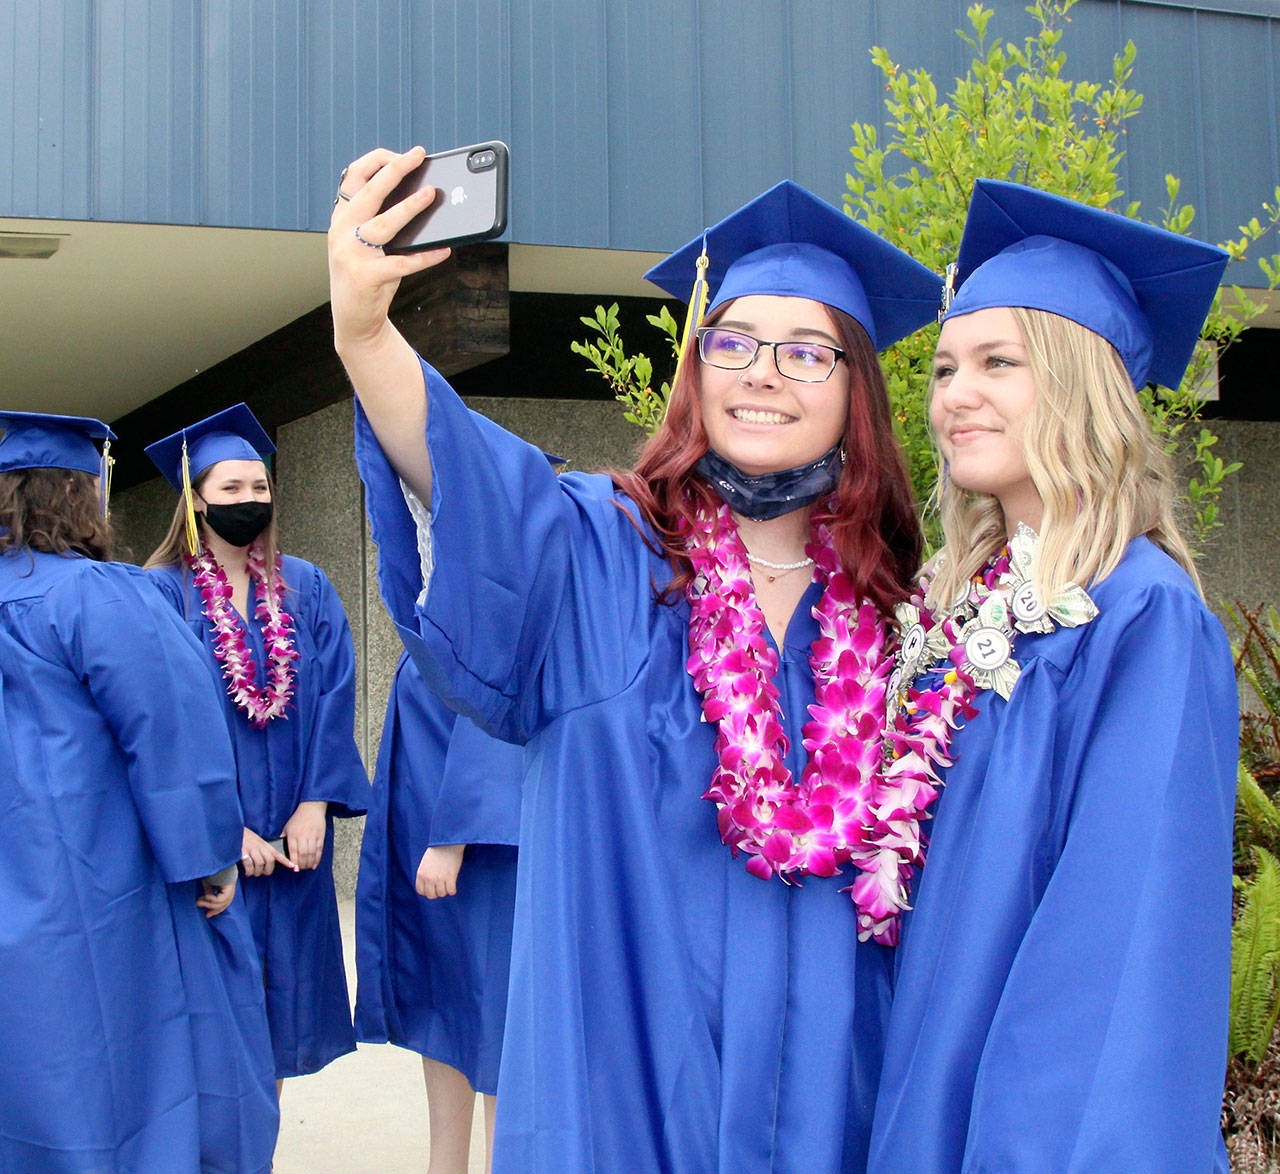 Tia Berson, left, and Chloe Mandeville take a selfie just before their march onto the field at Crescent High School for graduation ceremonies Saturday afternoon. There were 12 members of Crescent’s Class of 2021: Katelyn Baar, Brendan Bergstrom, Berson, James Bruch, Ashley Girard, Lael Harris, Justin Irving, Zach Irving, Darren Lee, Mandeville, Wyatt Mattix and Colton O’Neel. There was no designated valedictorian this year. (Dave Logan/for Peninsula Daily News)